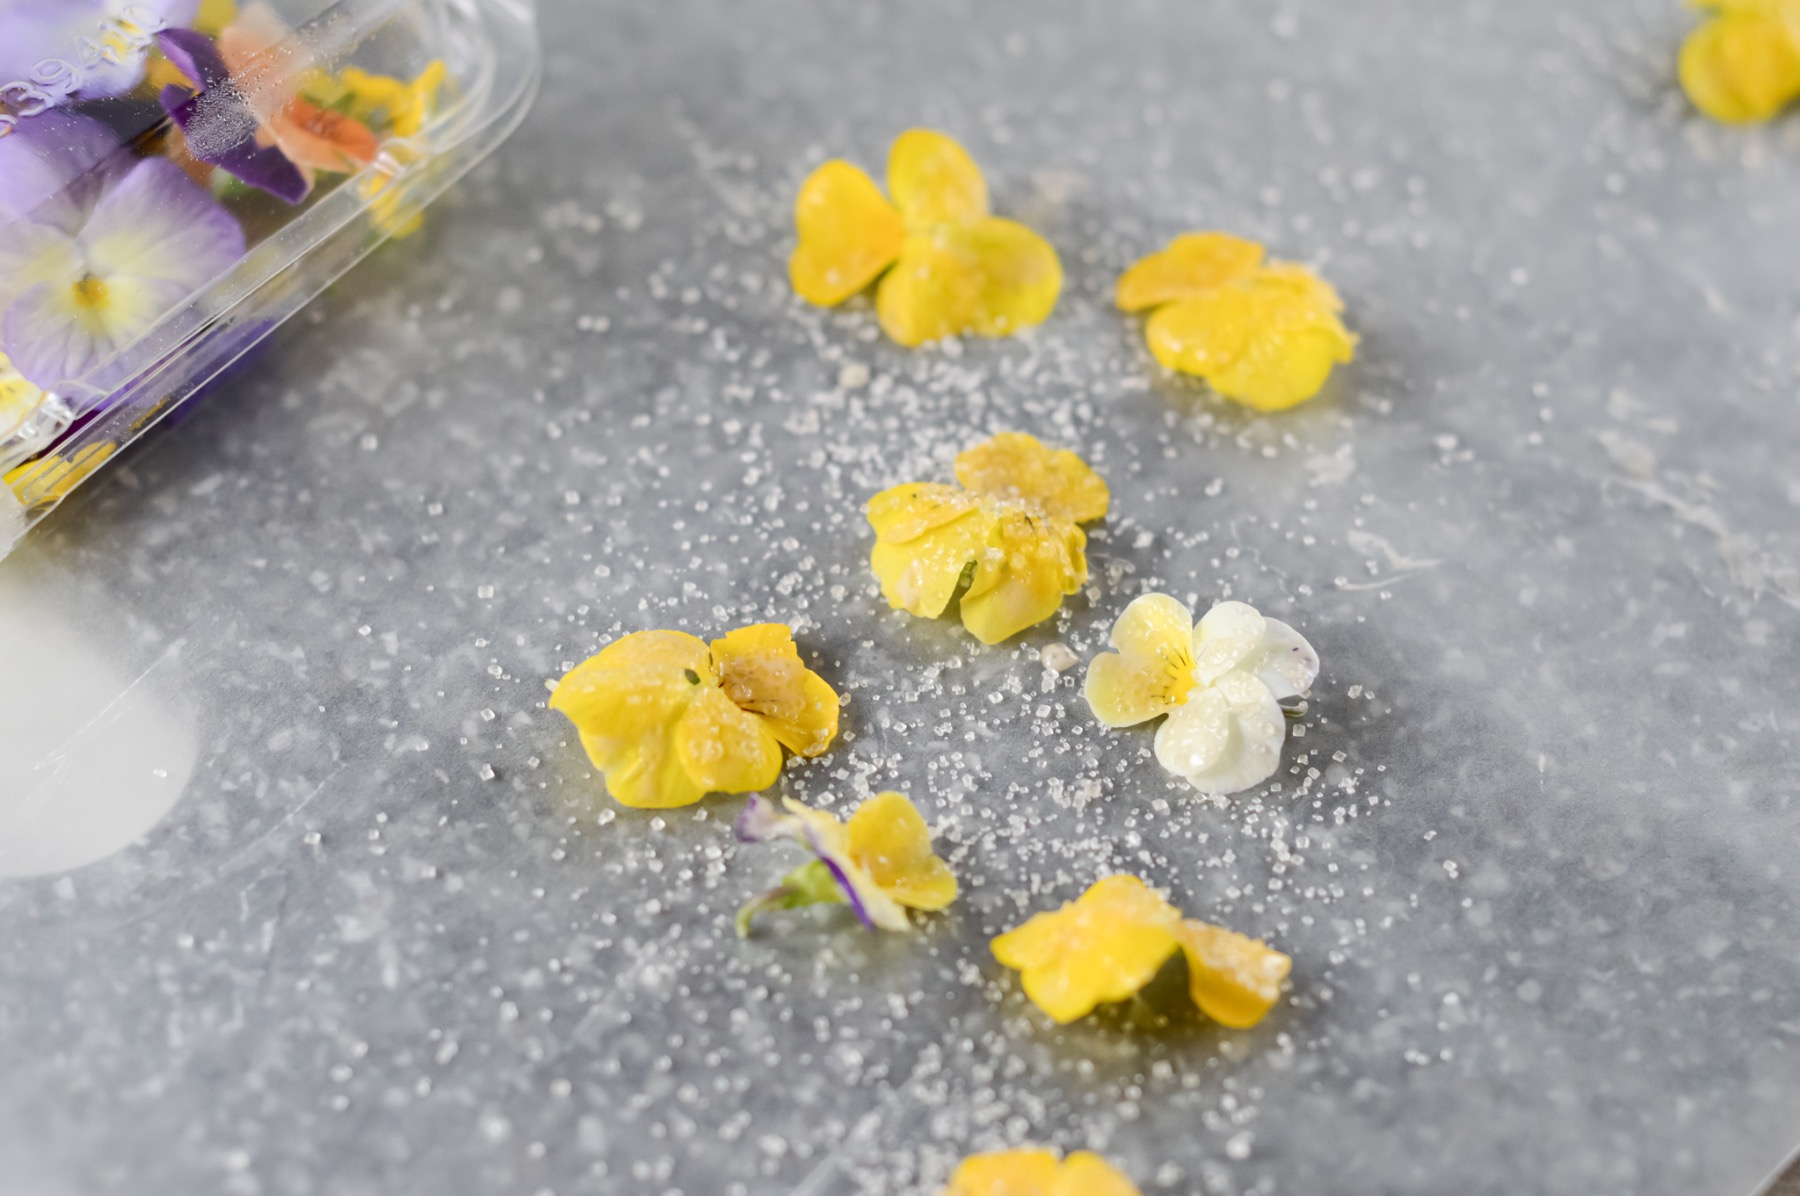 lay the flowers on parchment to make candied flowers